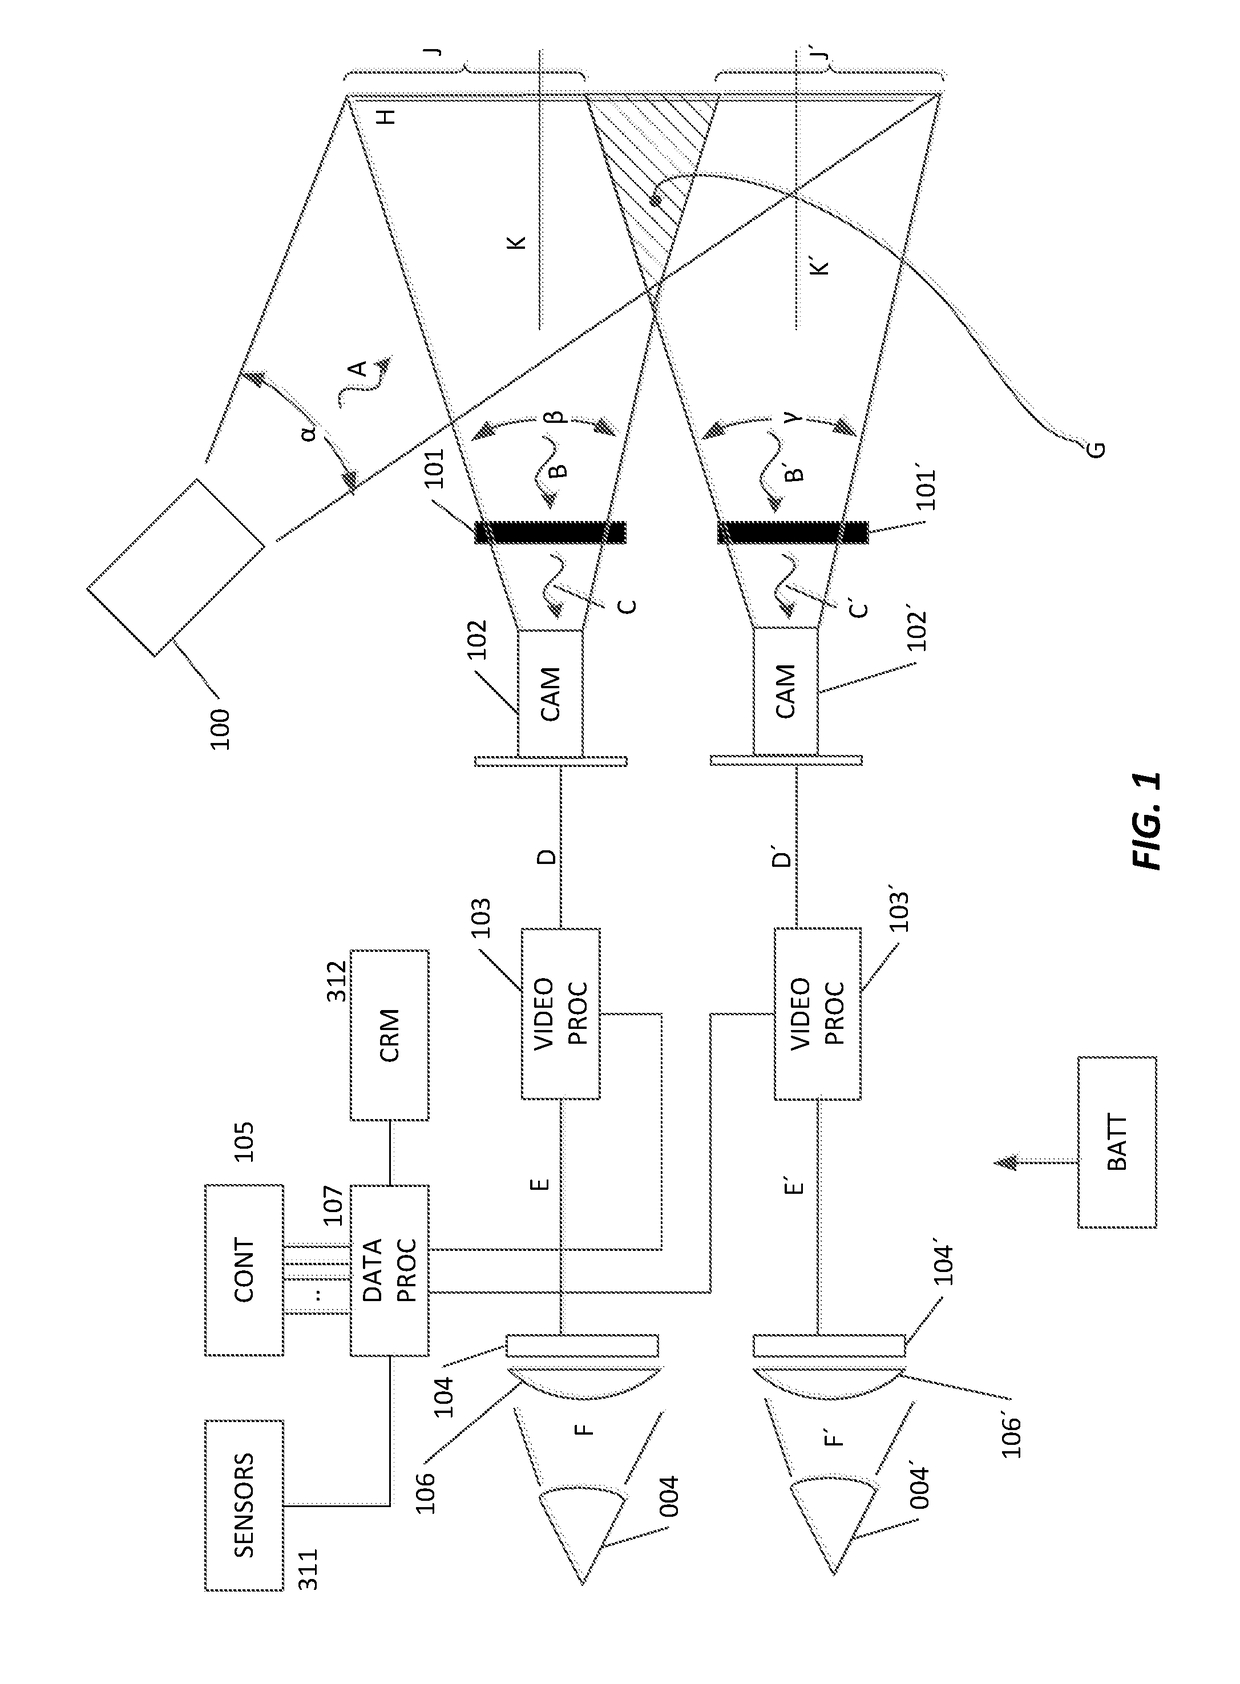 Vision enhancing system and method